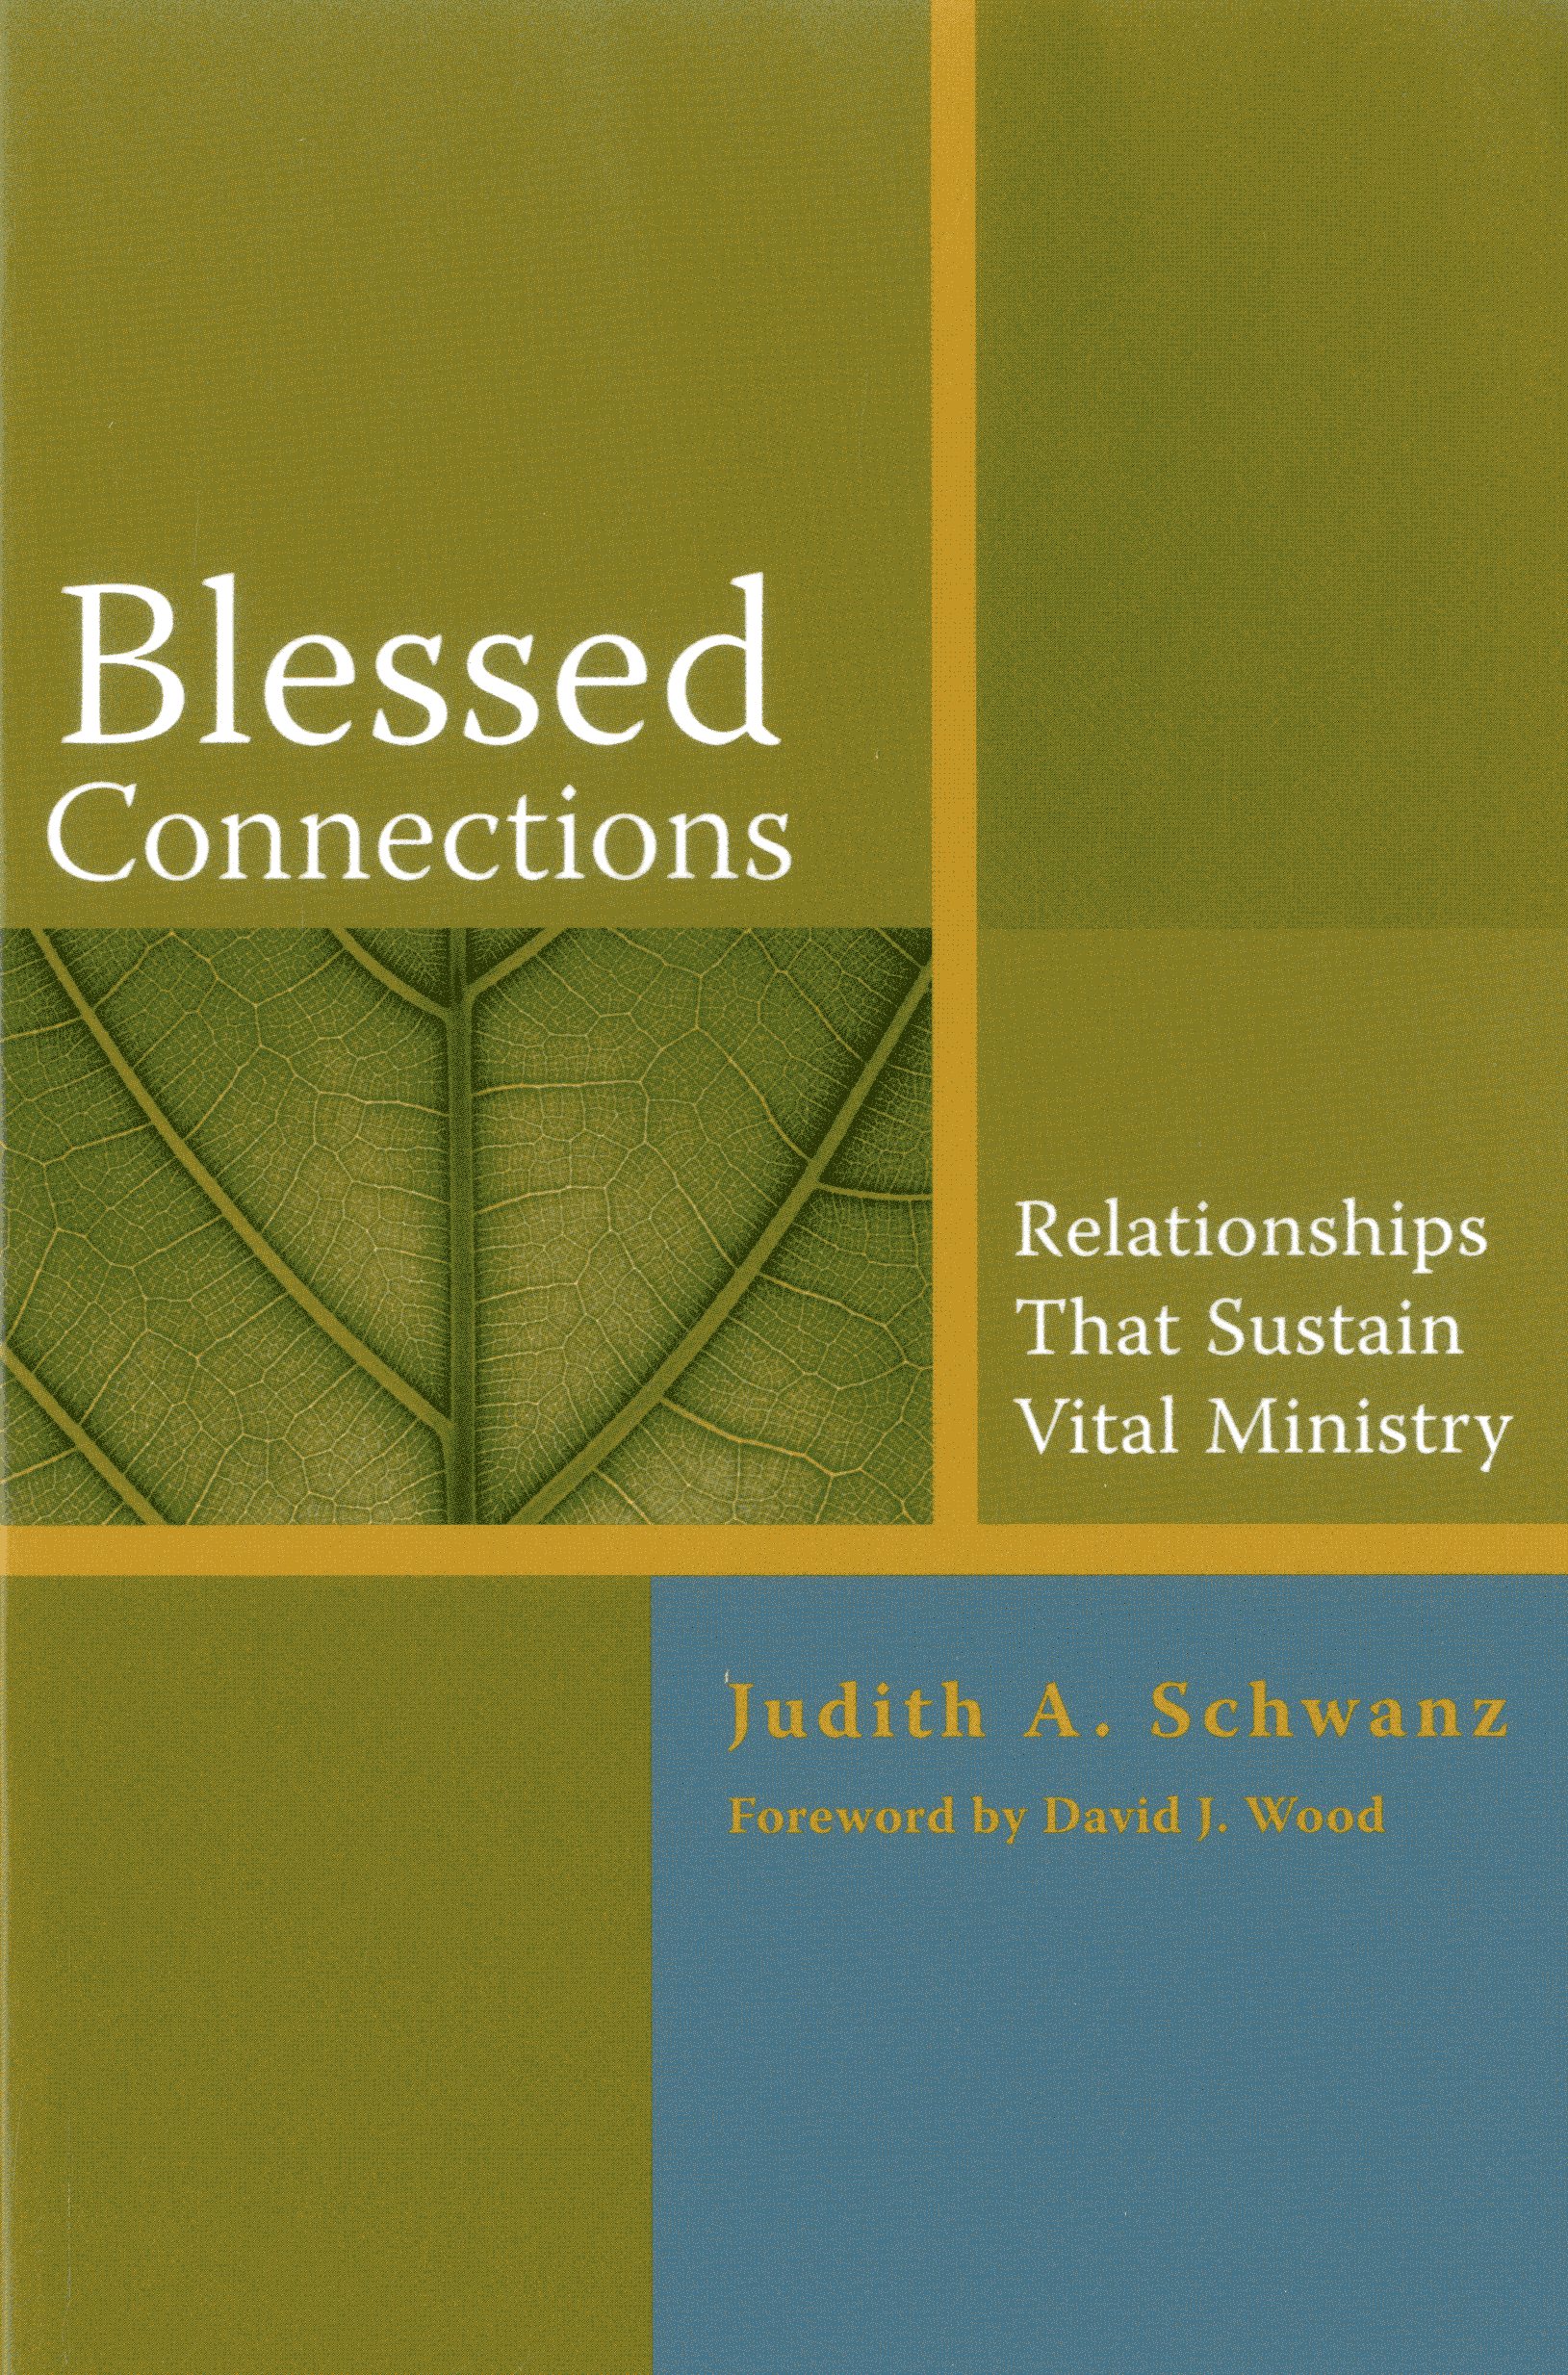 Blessed Connections: Relationships that Sustain Vital Ministry